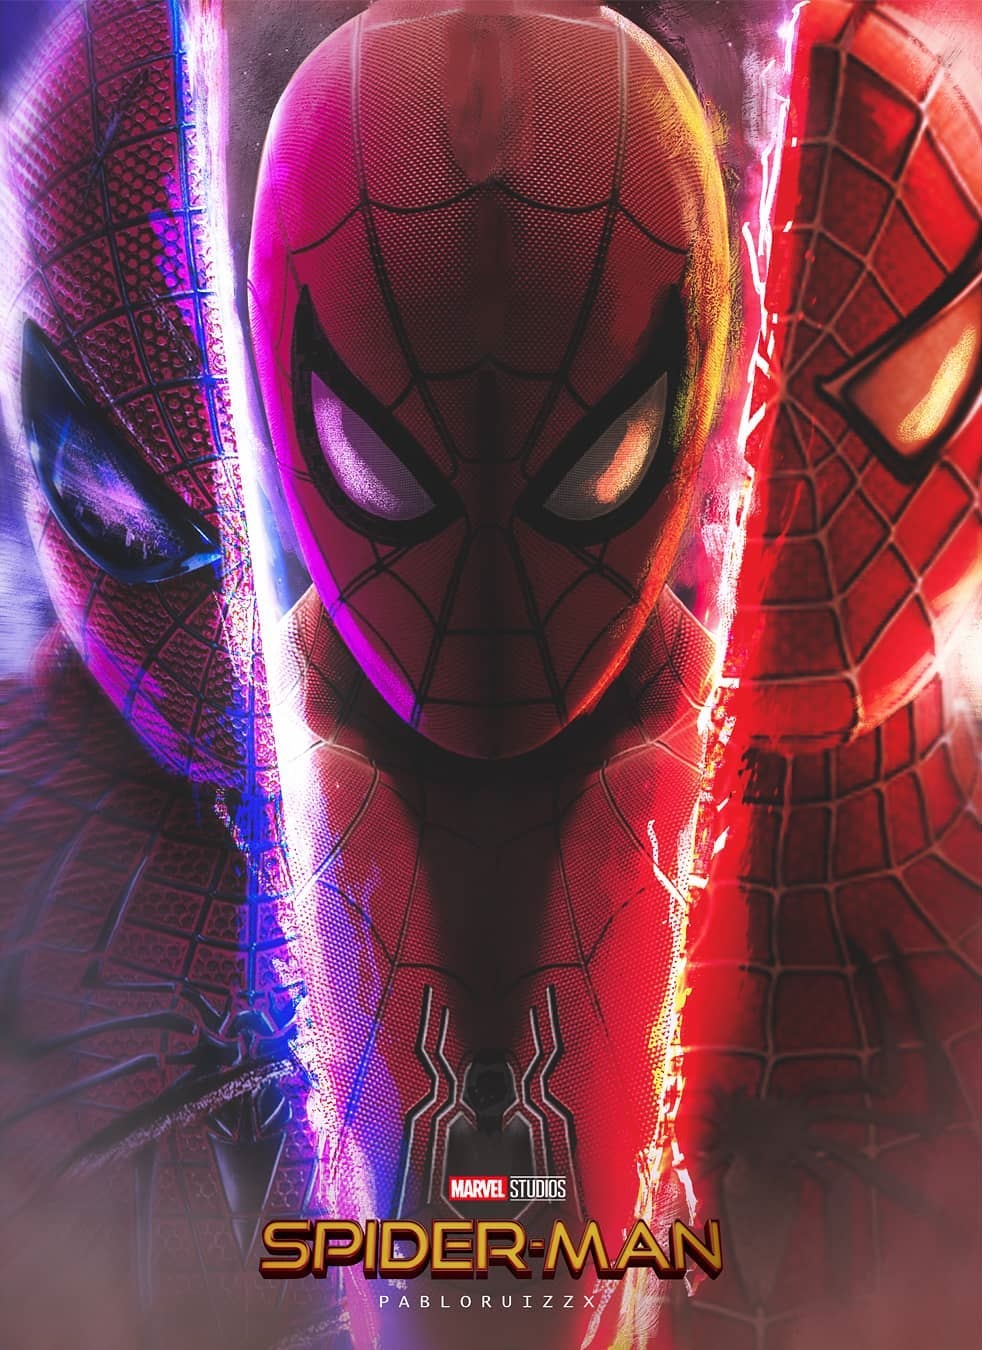 Awesome Fan Poster Imagines Tobey Maguire And Andrew Garfield In Spider Man 3 Got This Covered